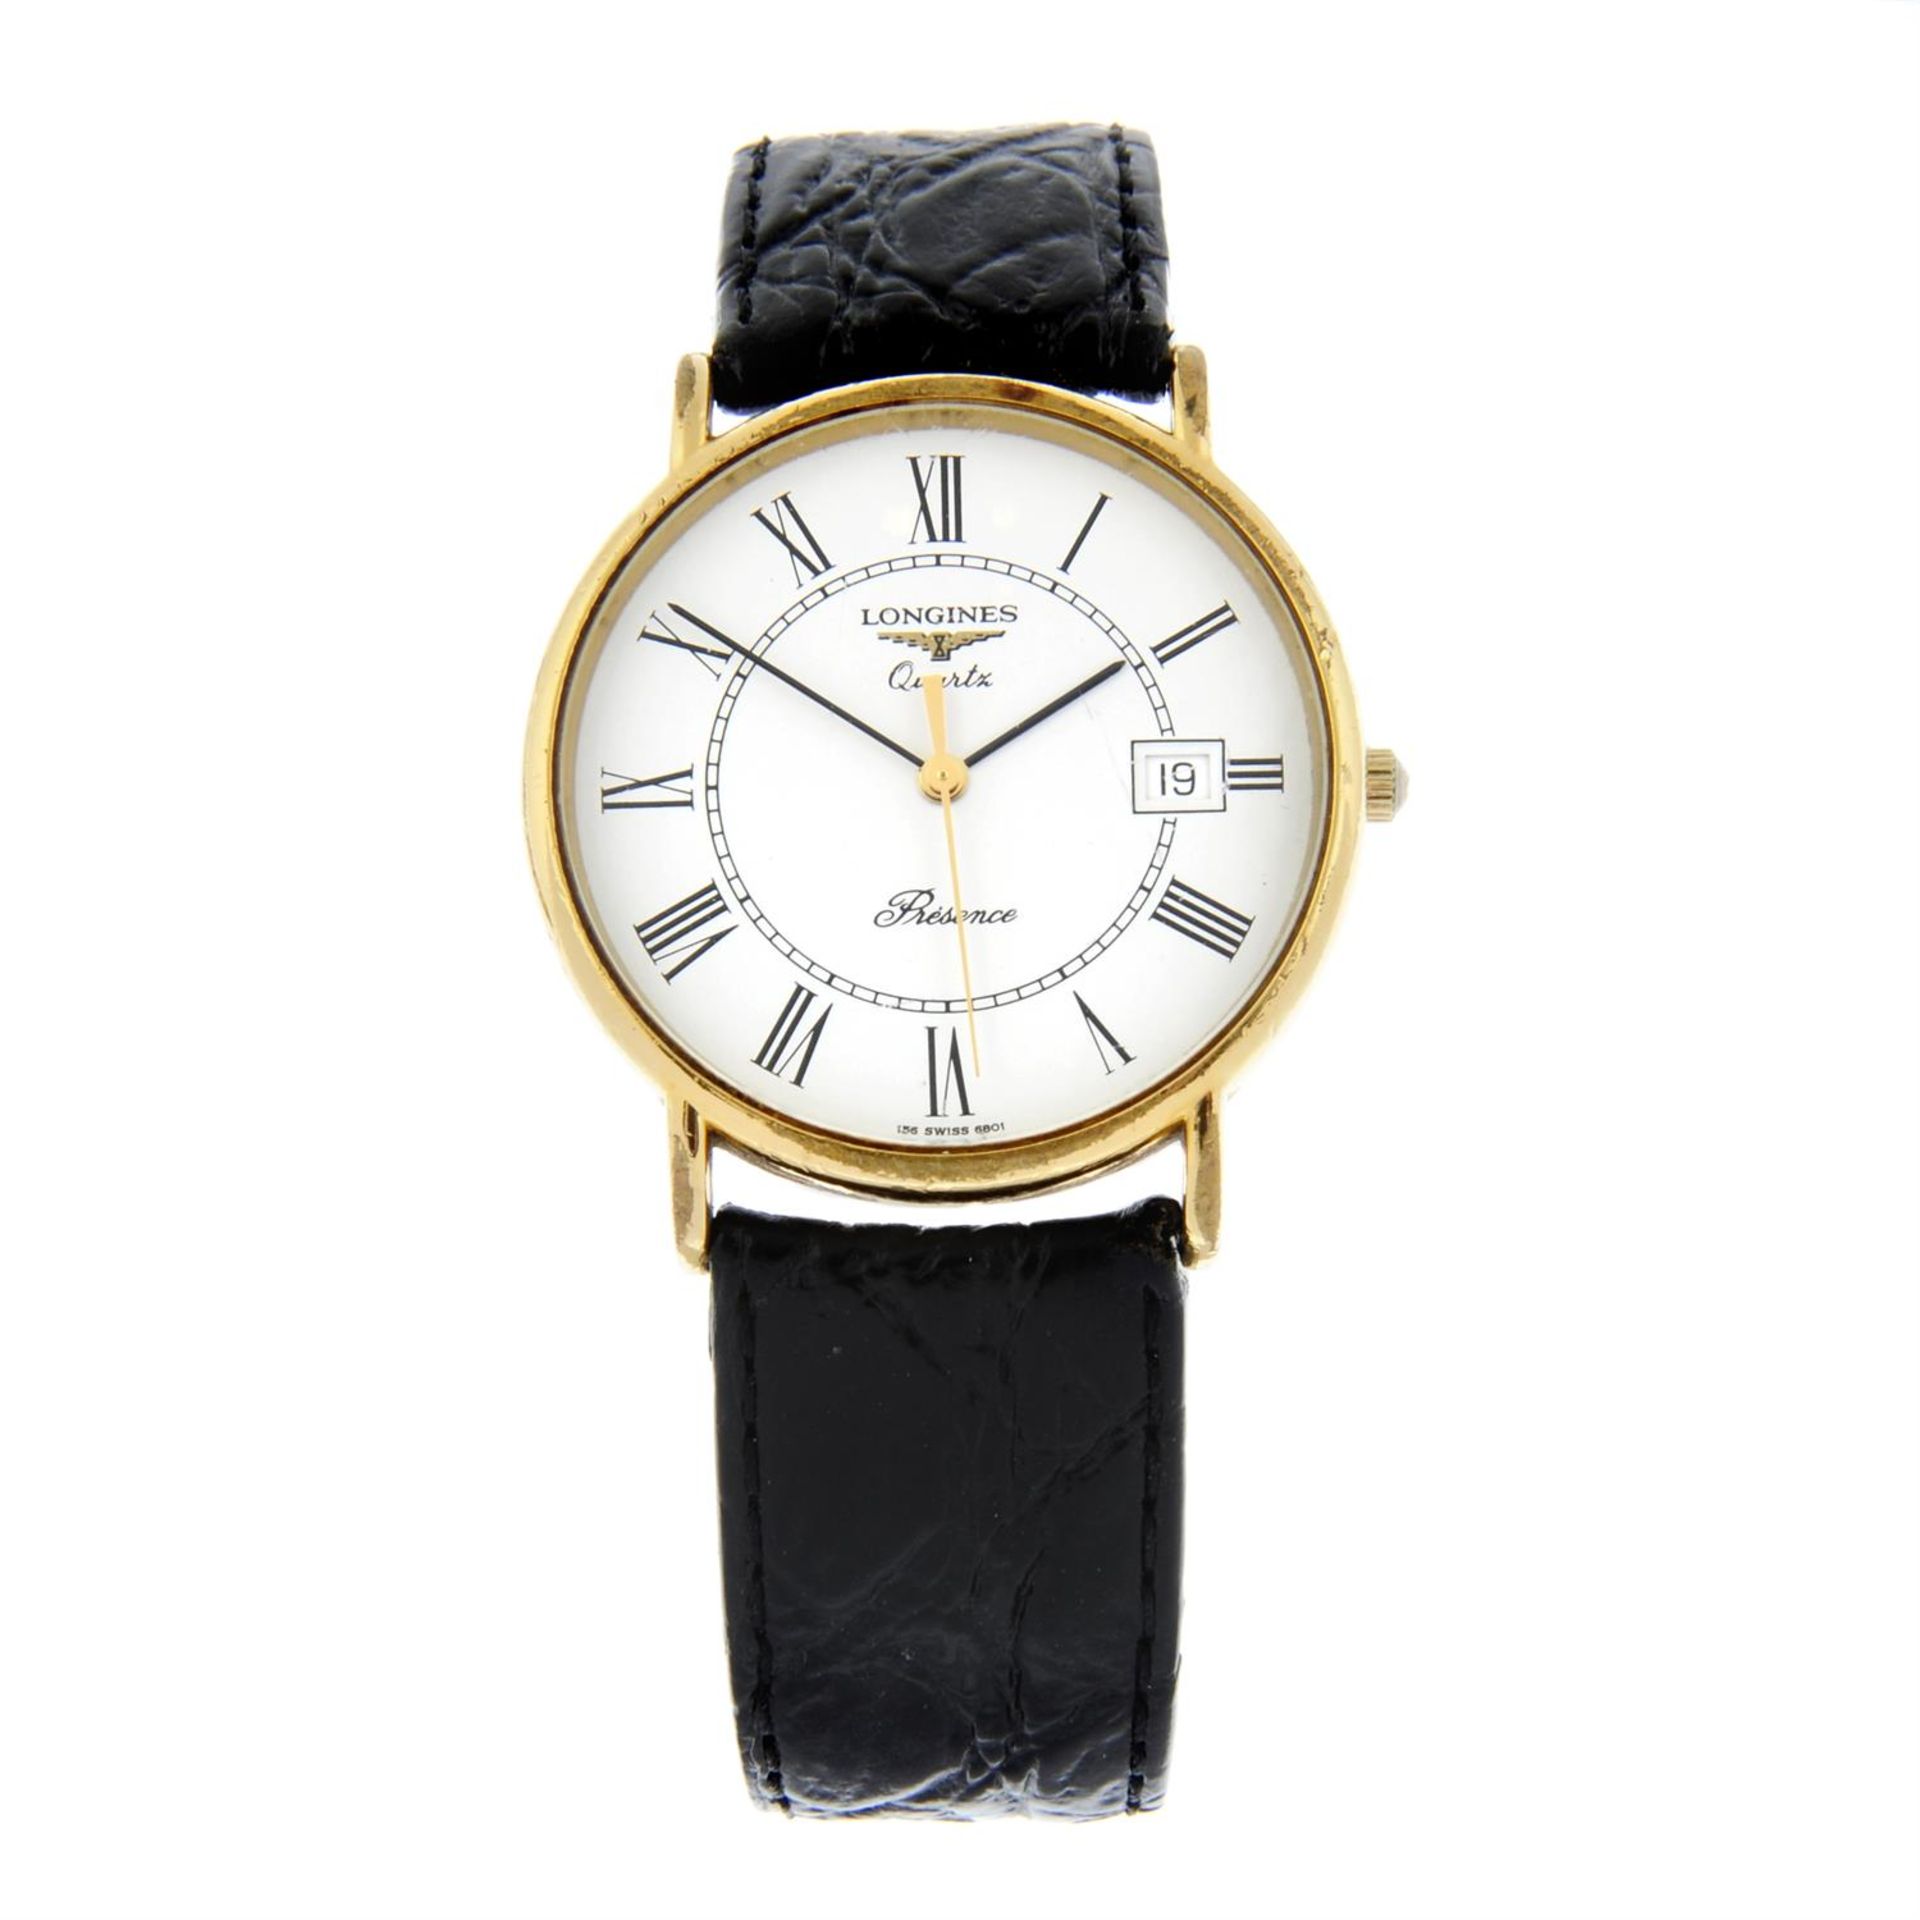 LONGINES - a gold plated Presence wrist watch (33mm) together with another gold plated Longines